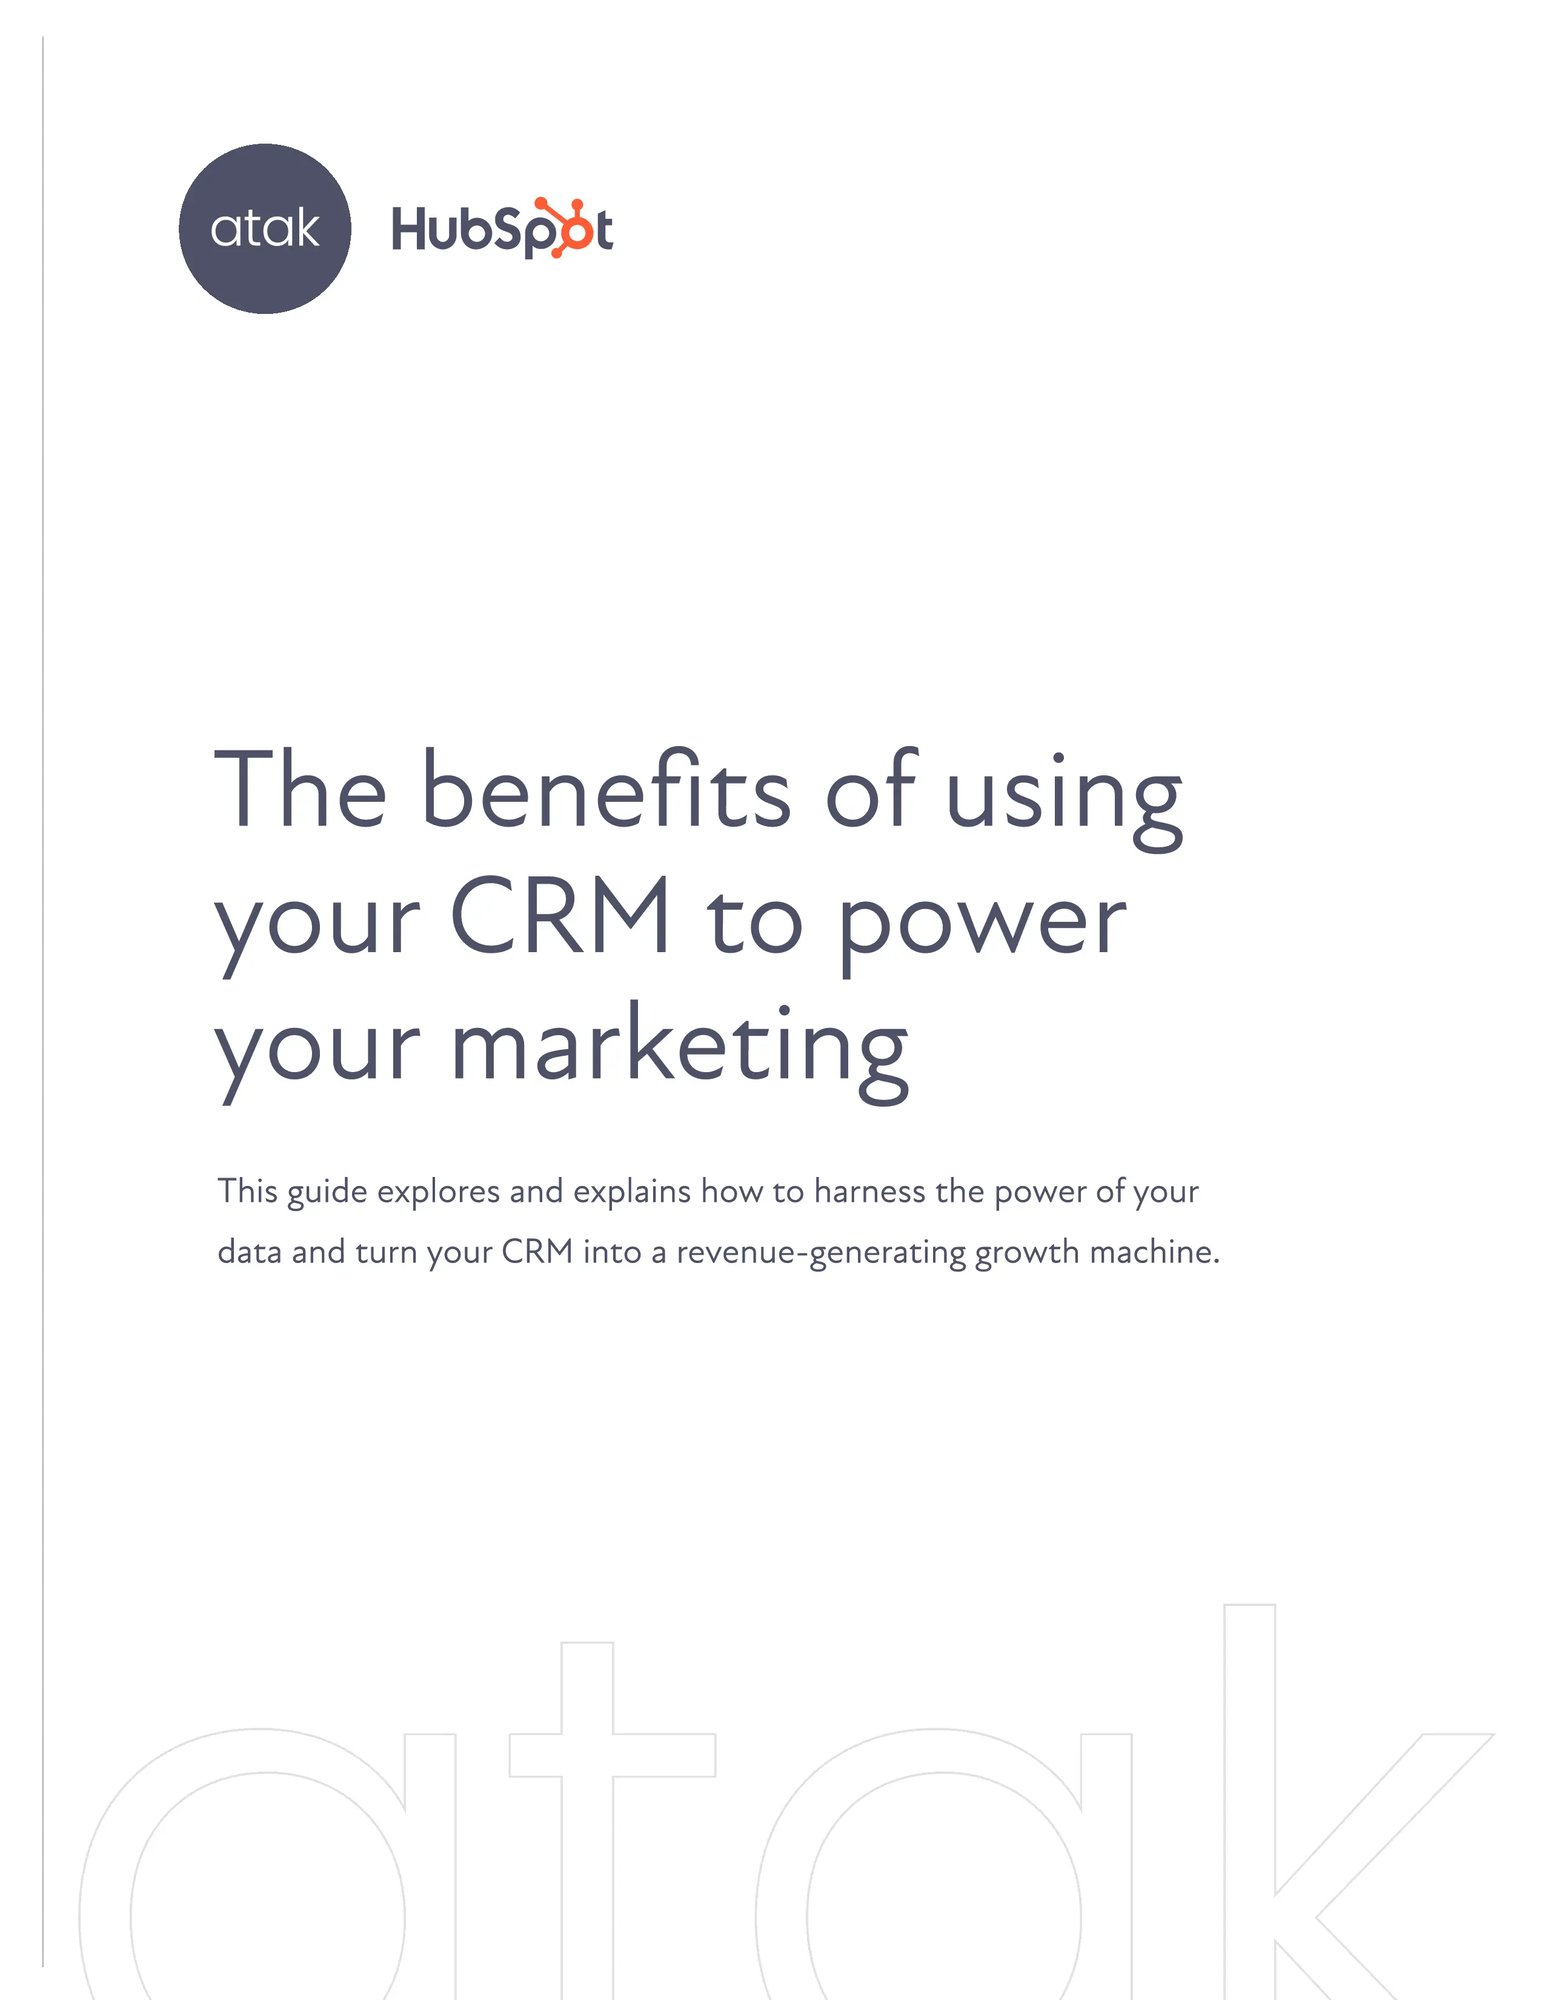 The benefits of using your CRM to power your marketing